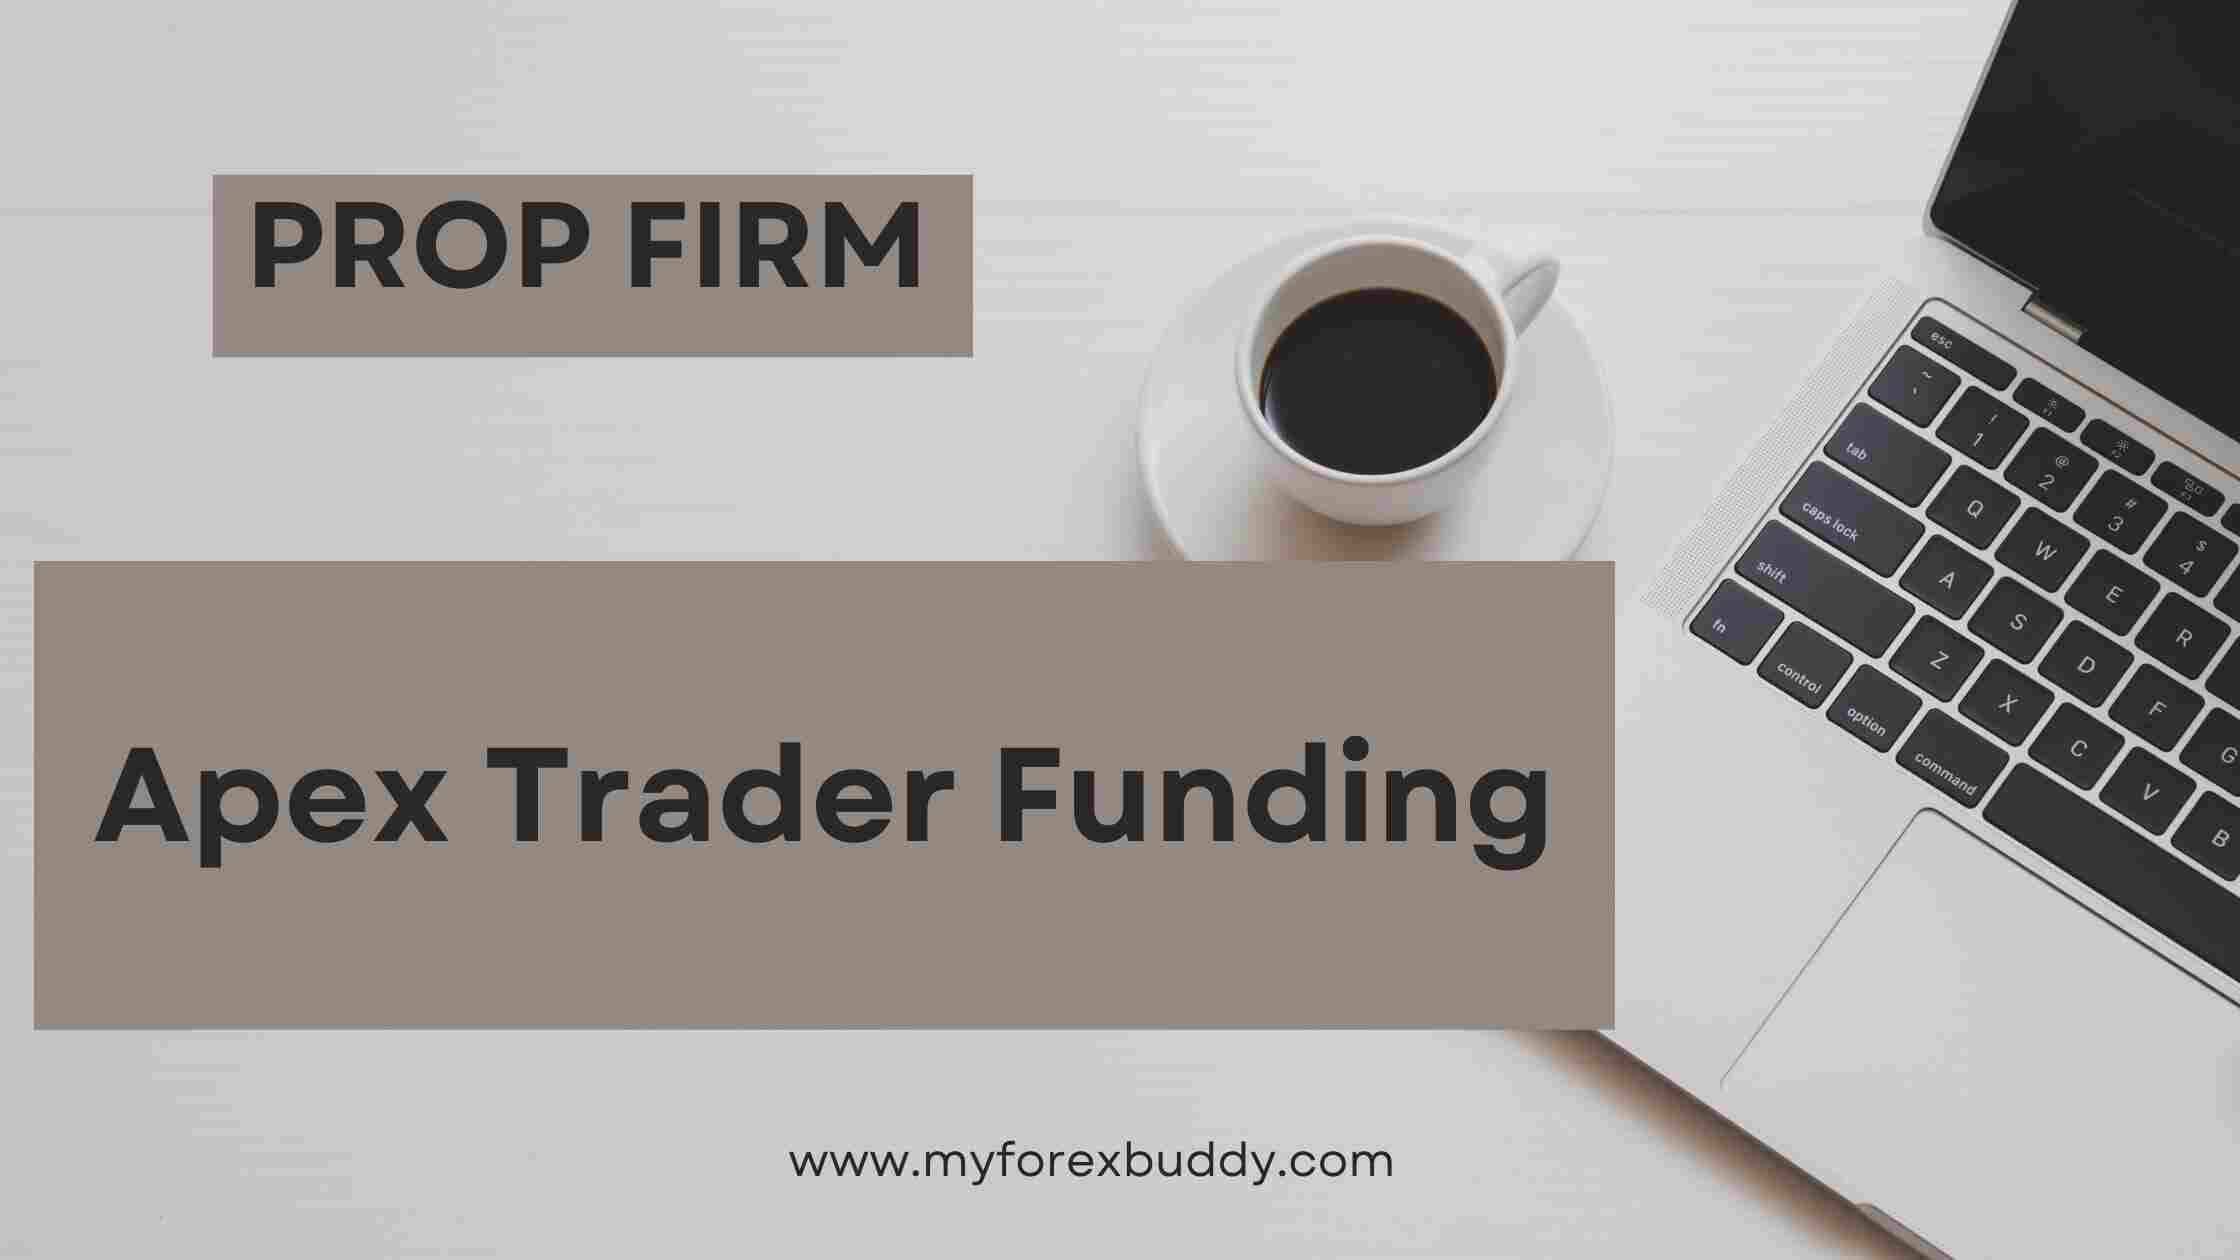 My $300,000 Journey with Apex Trader Funding: Trading with Futures Prop Firm